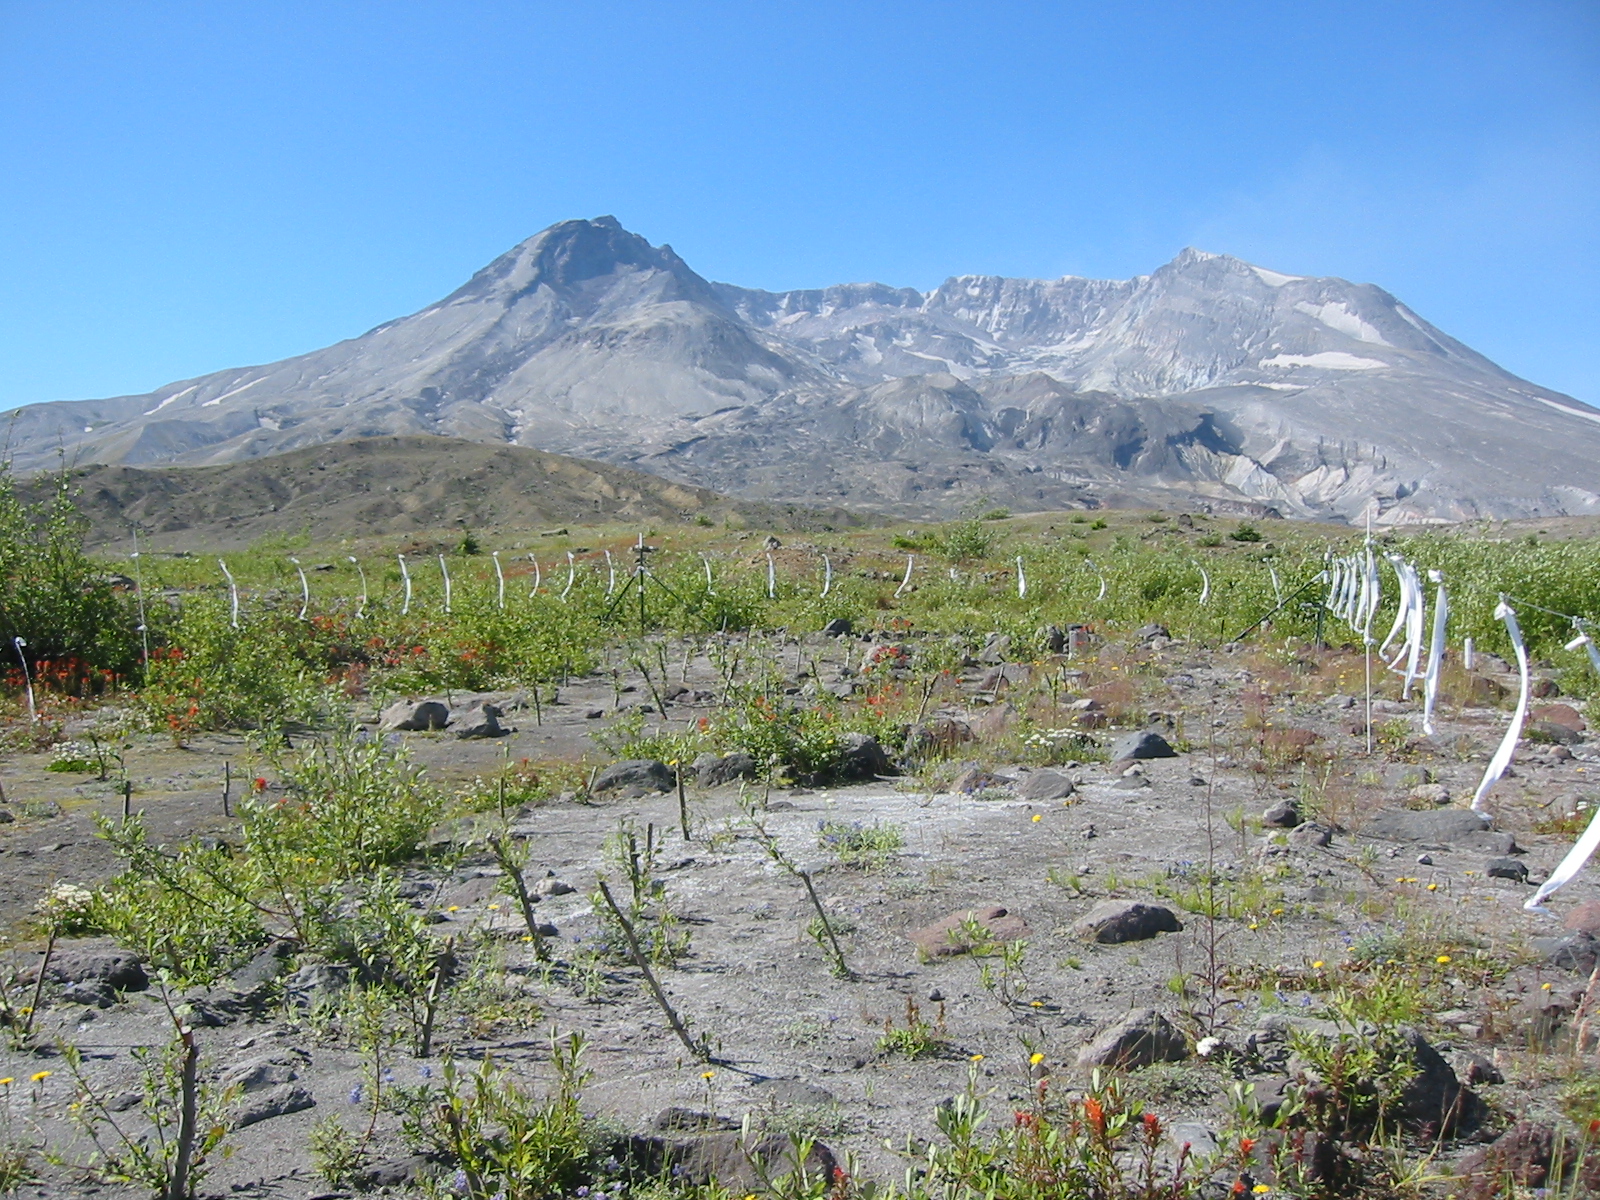 Research Plot at Mount St. Helens